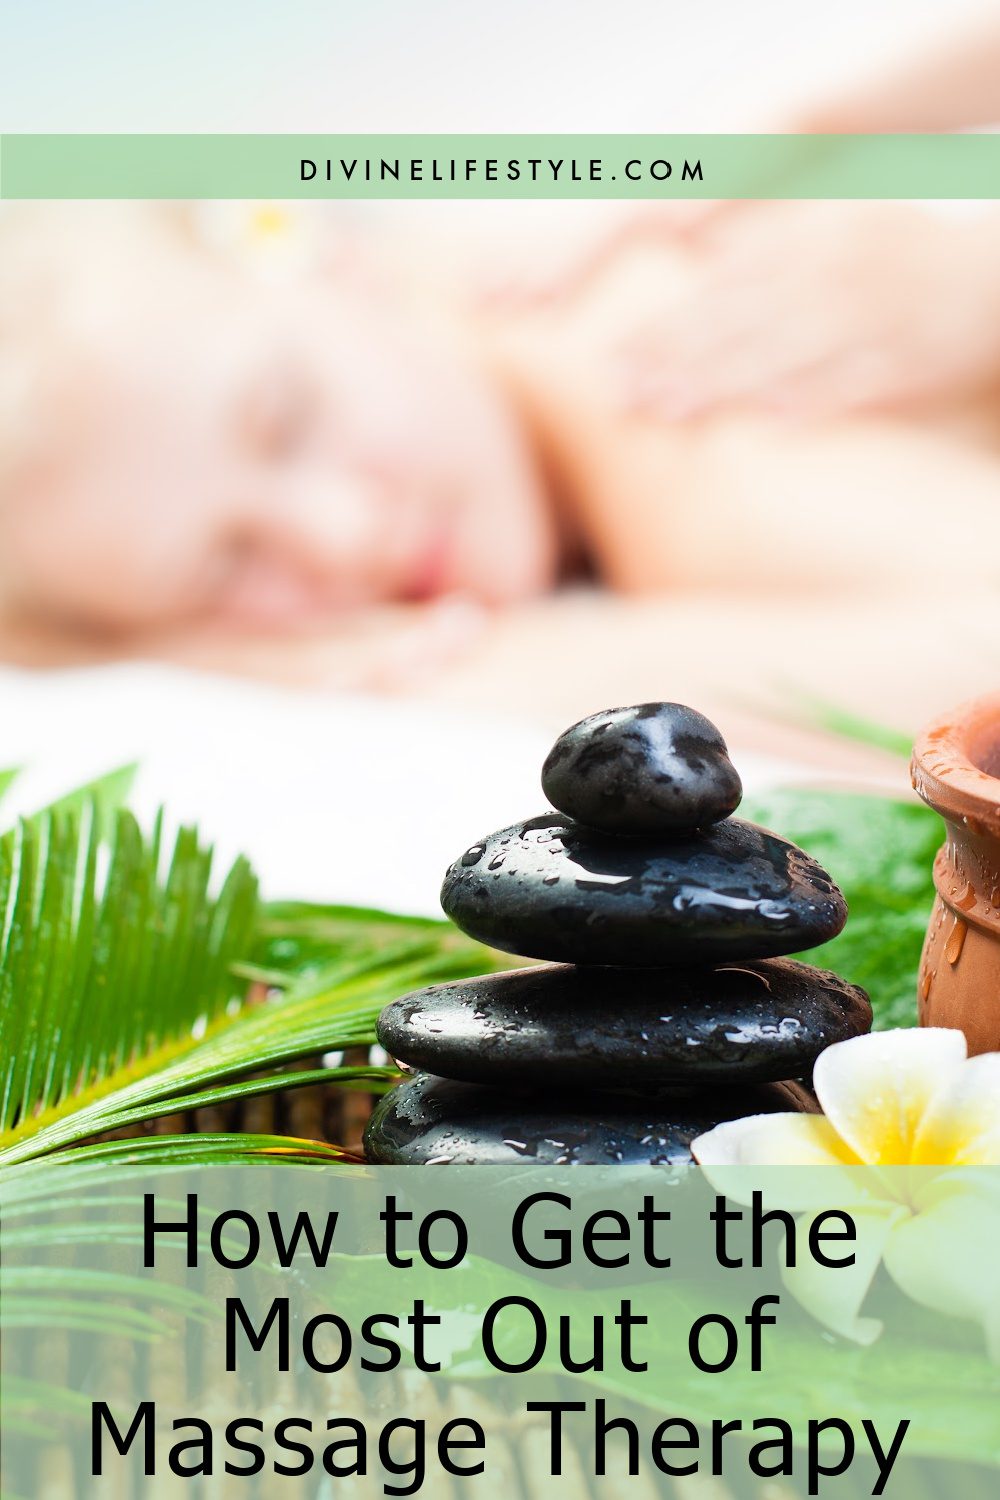 How to Get the Most Out of Massage Therapy